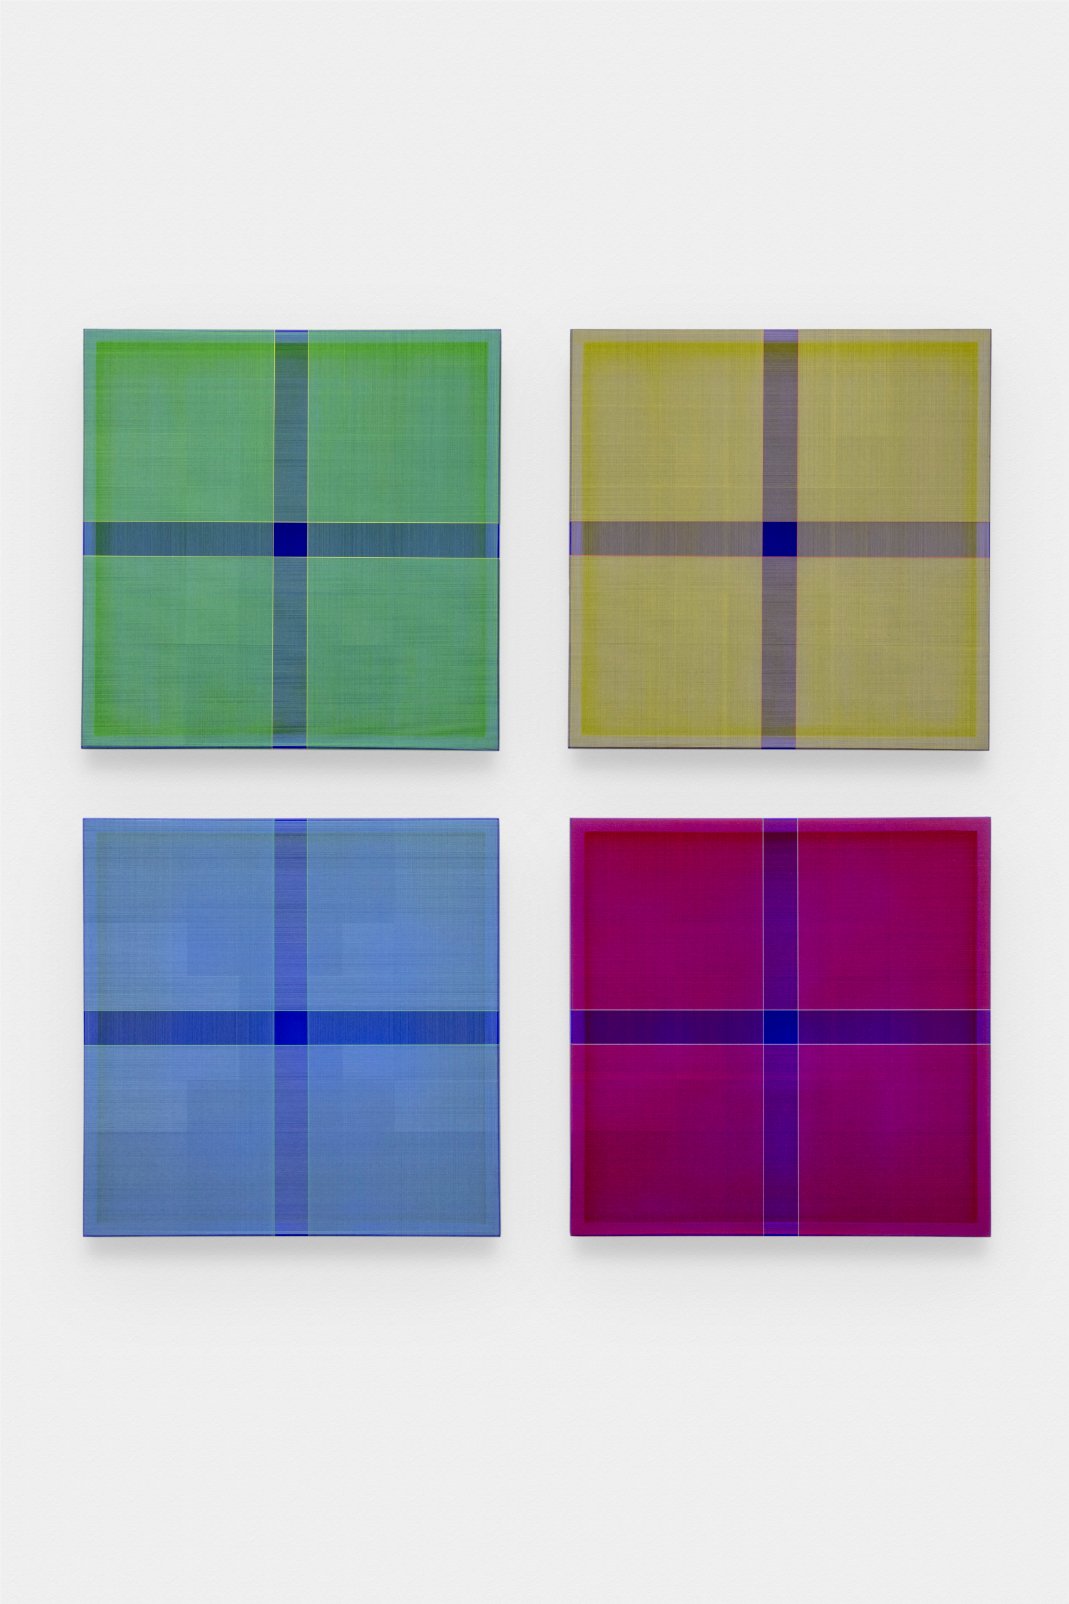  Brian Wills  Untitled (YKB Quadtych, Vertical/Horizontal) , 2021 - 2022 Oil and single strand thread on oak 24 x 24 in (61 x 61 cm) each panel Courtesy of the Artist and OCHI. 